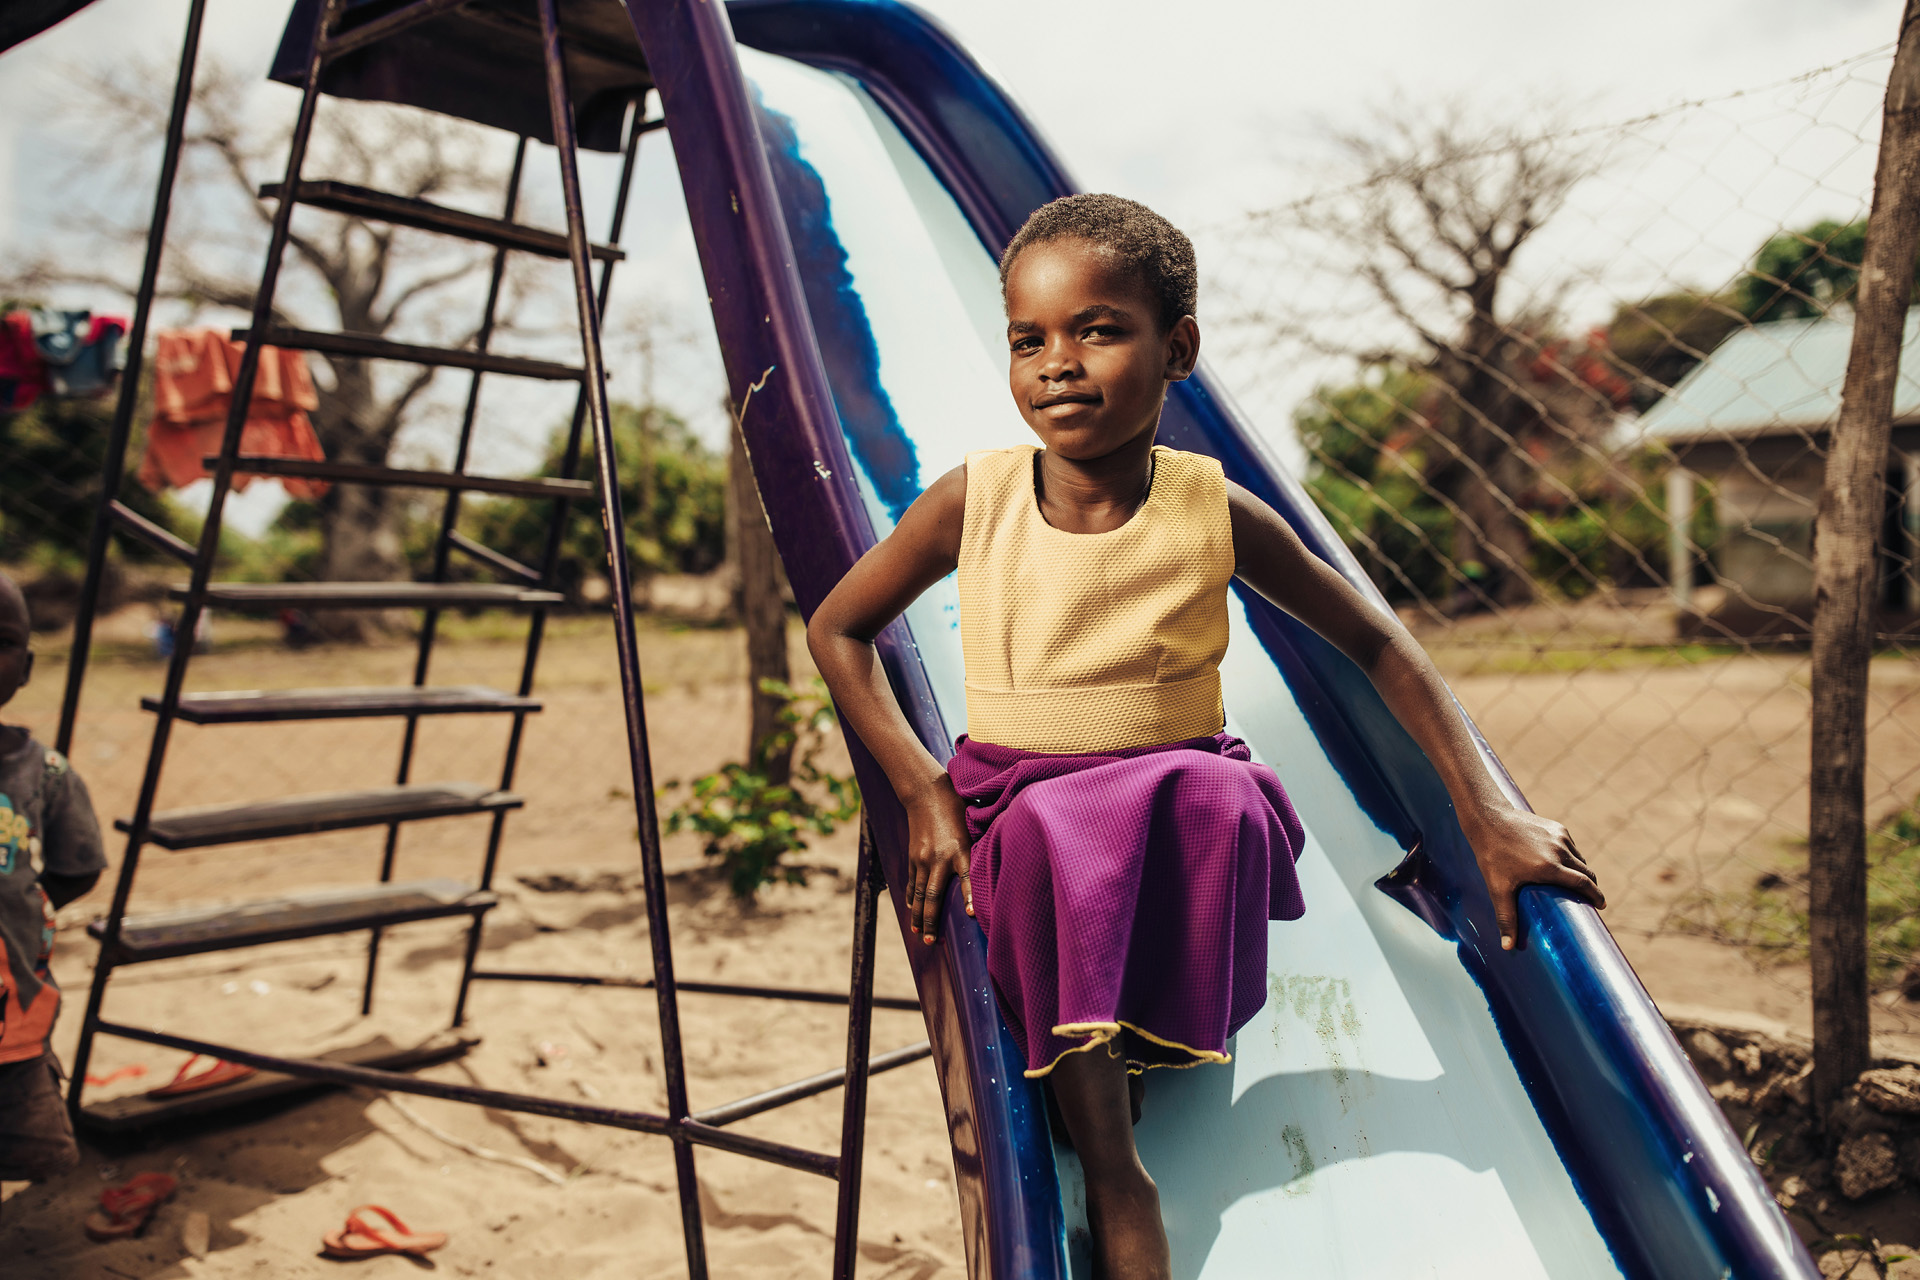 Jessica, 8, plays on the slide at her Compassion center in Kenya